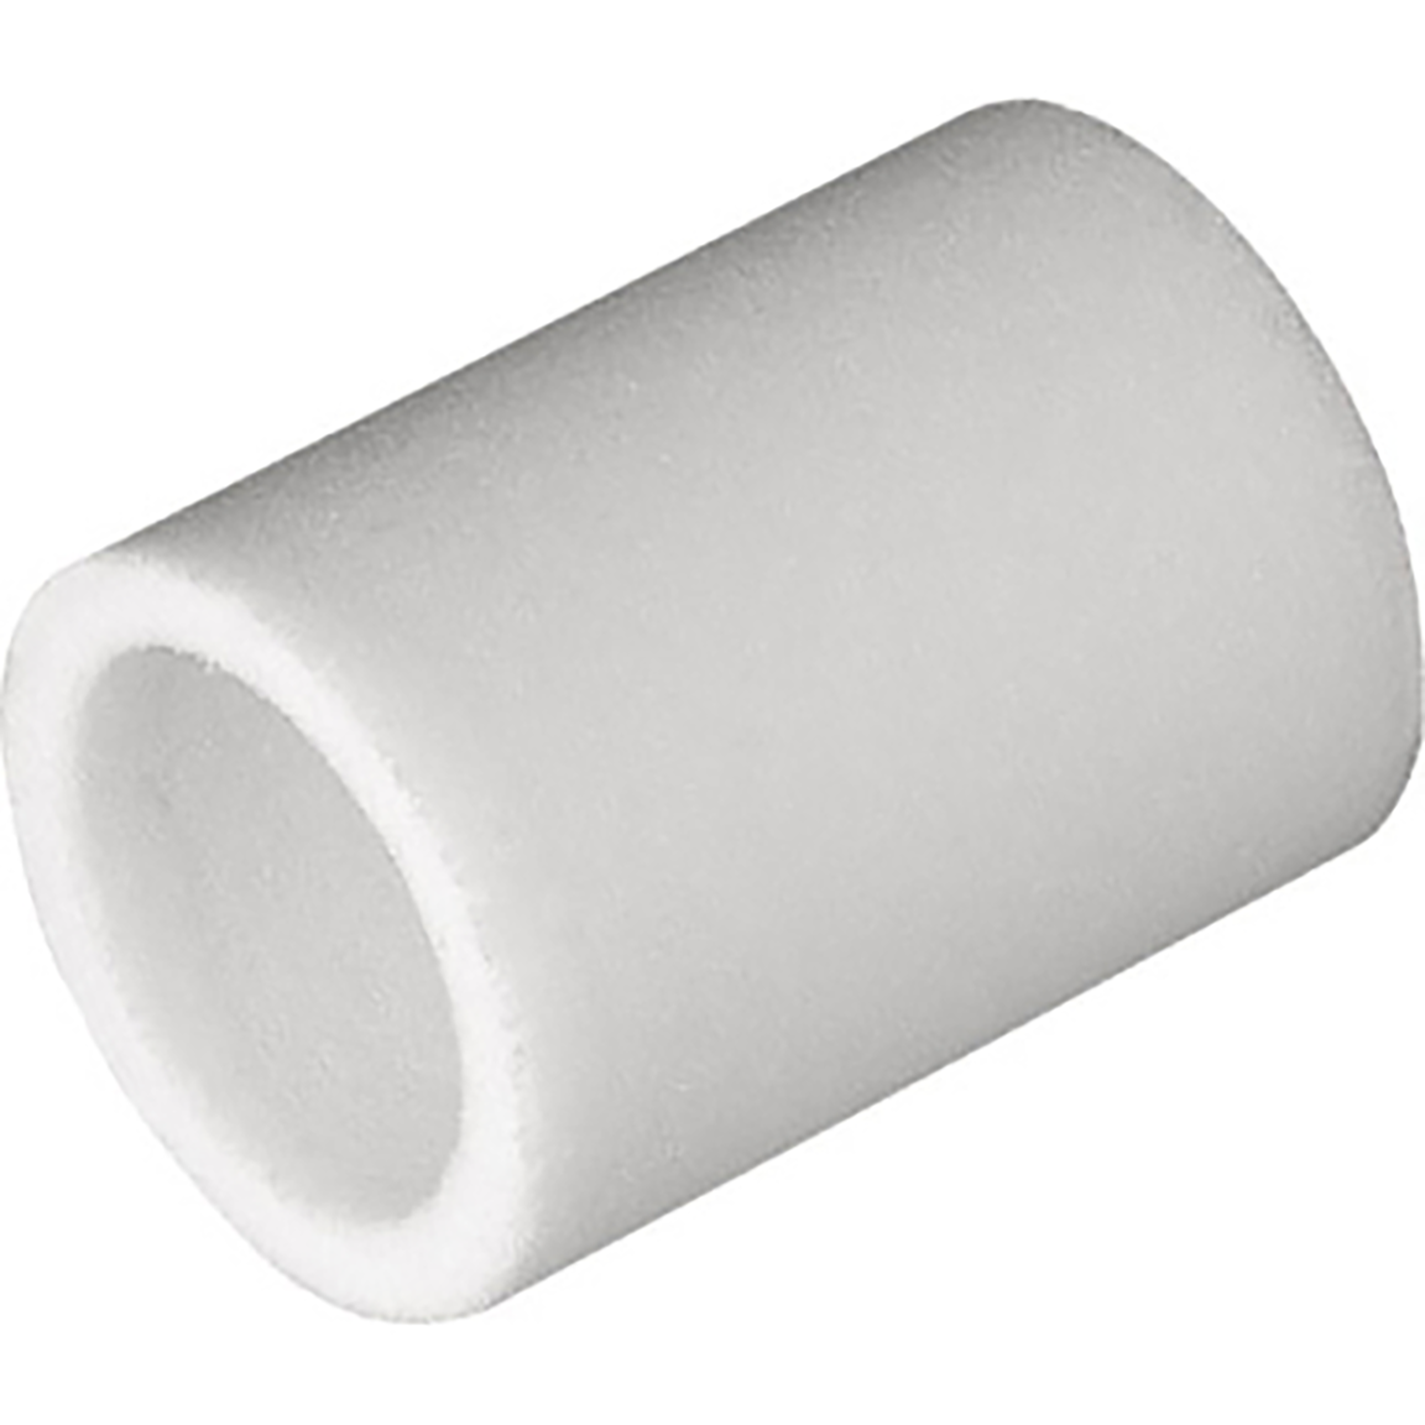 Filter Cartridge Conjunction with Service